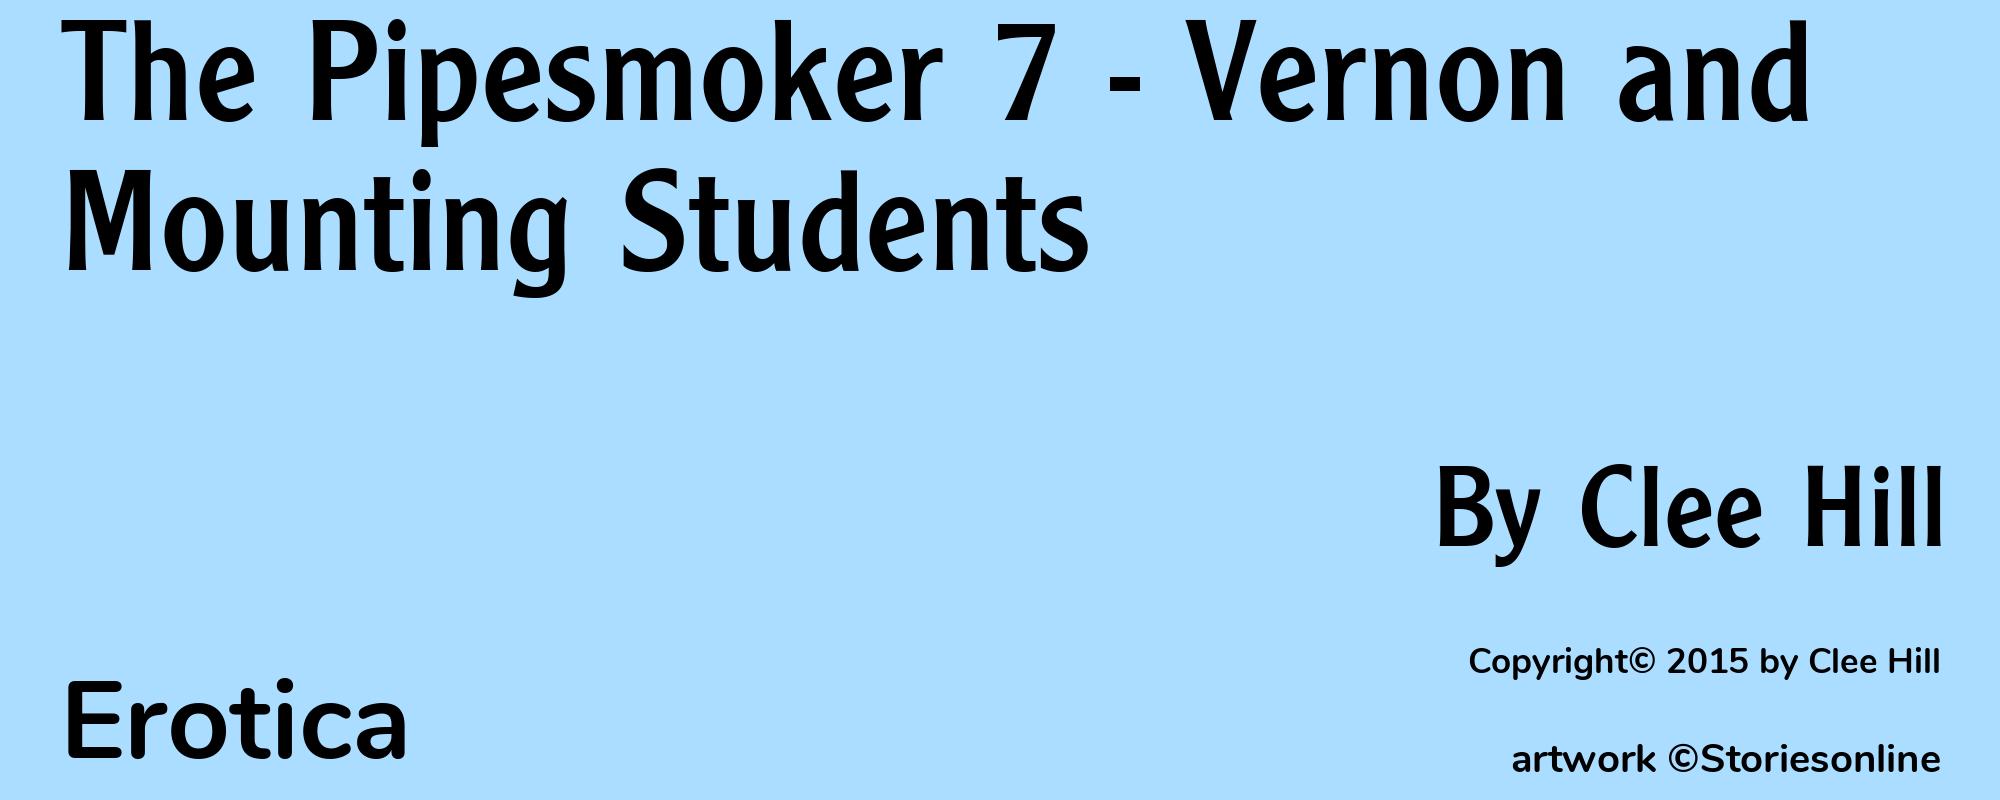 The Pipesmoker 7 - Vernon and Mounting Students - Cover